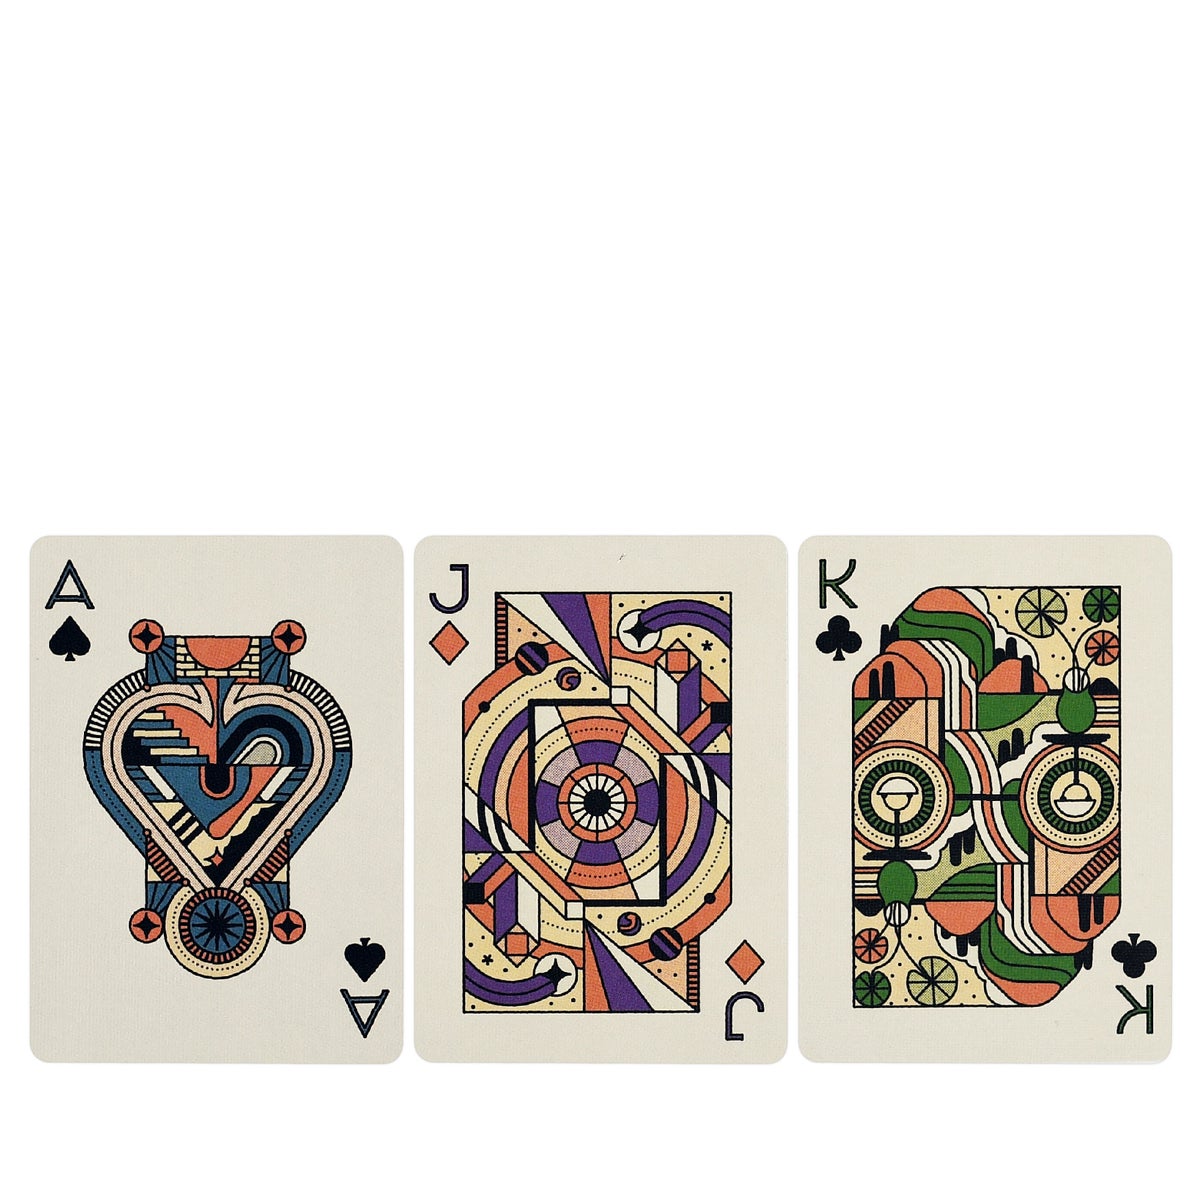 ART OF PLAY - PLAYING CARDS - MINDFULNESS DECK